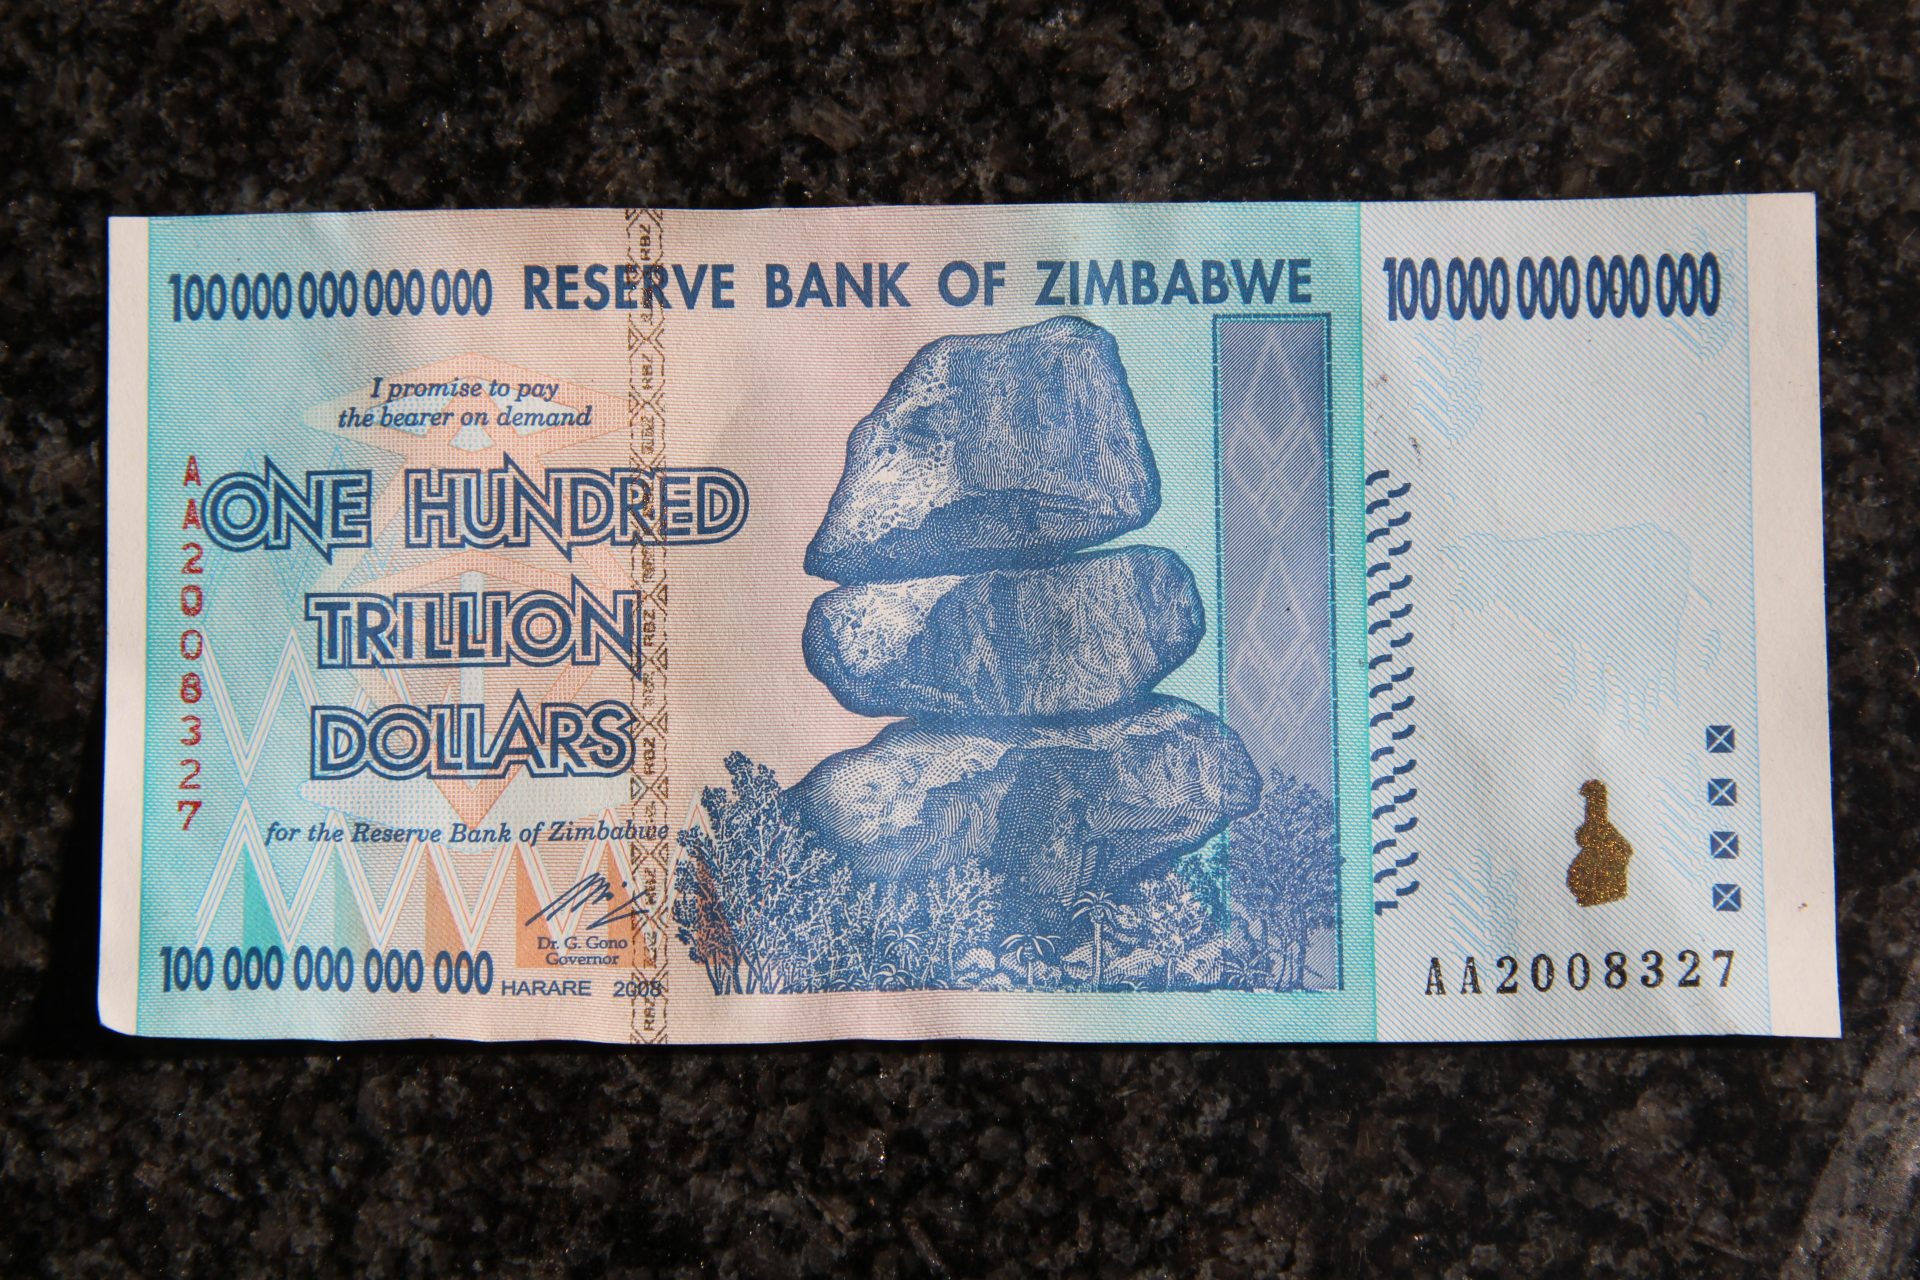 Do you have change for one hundred trillion?